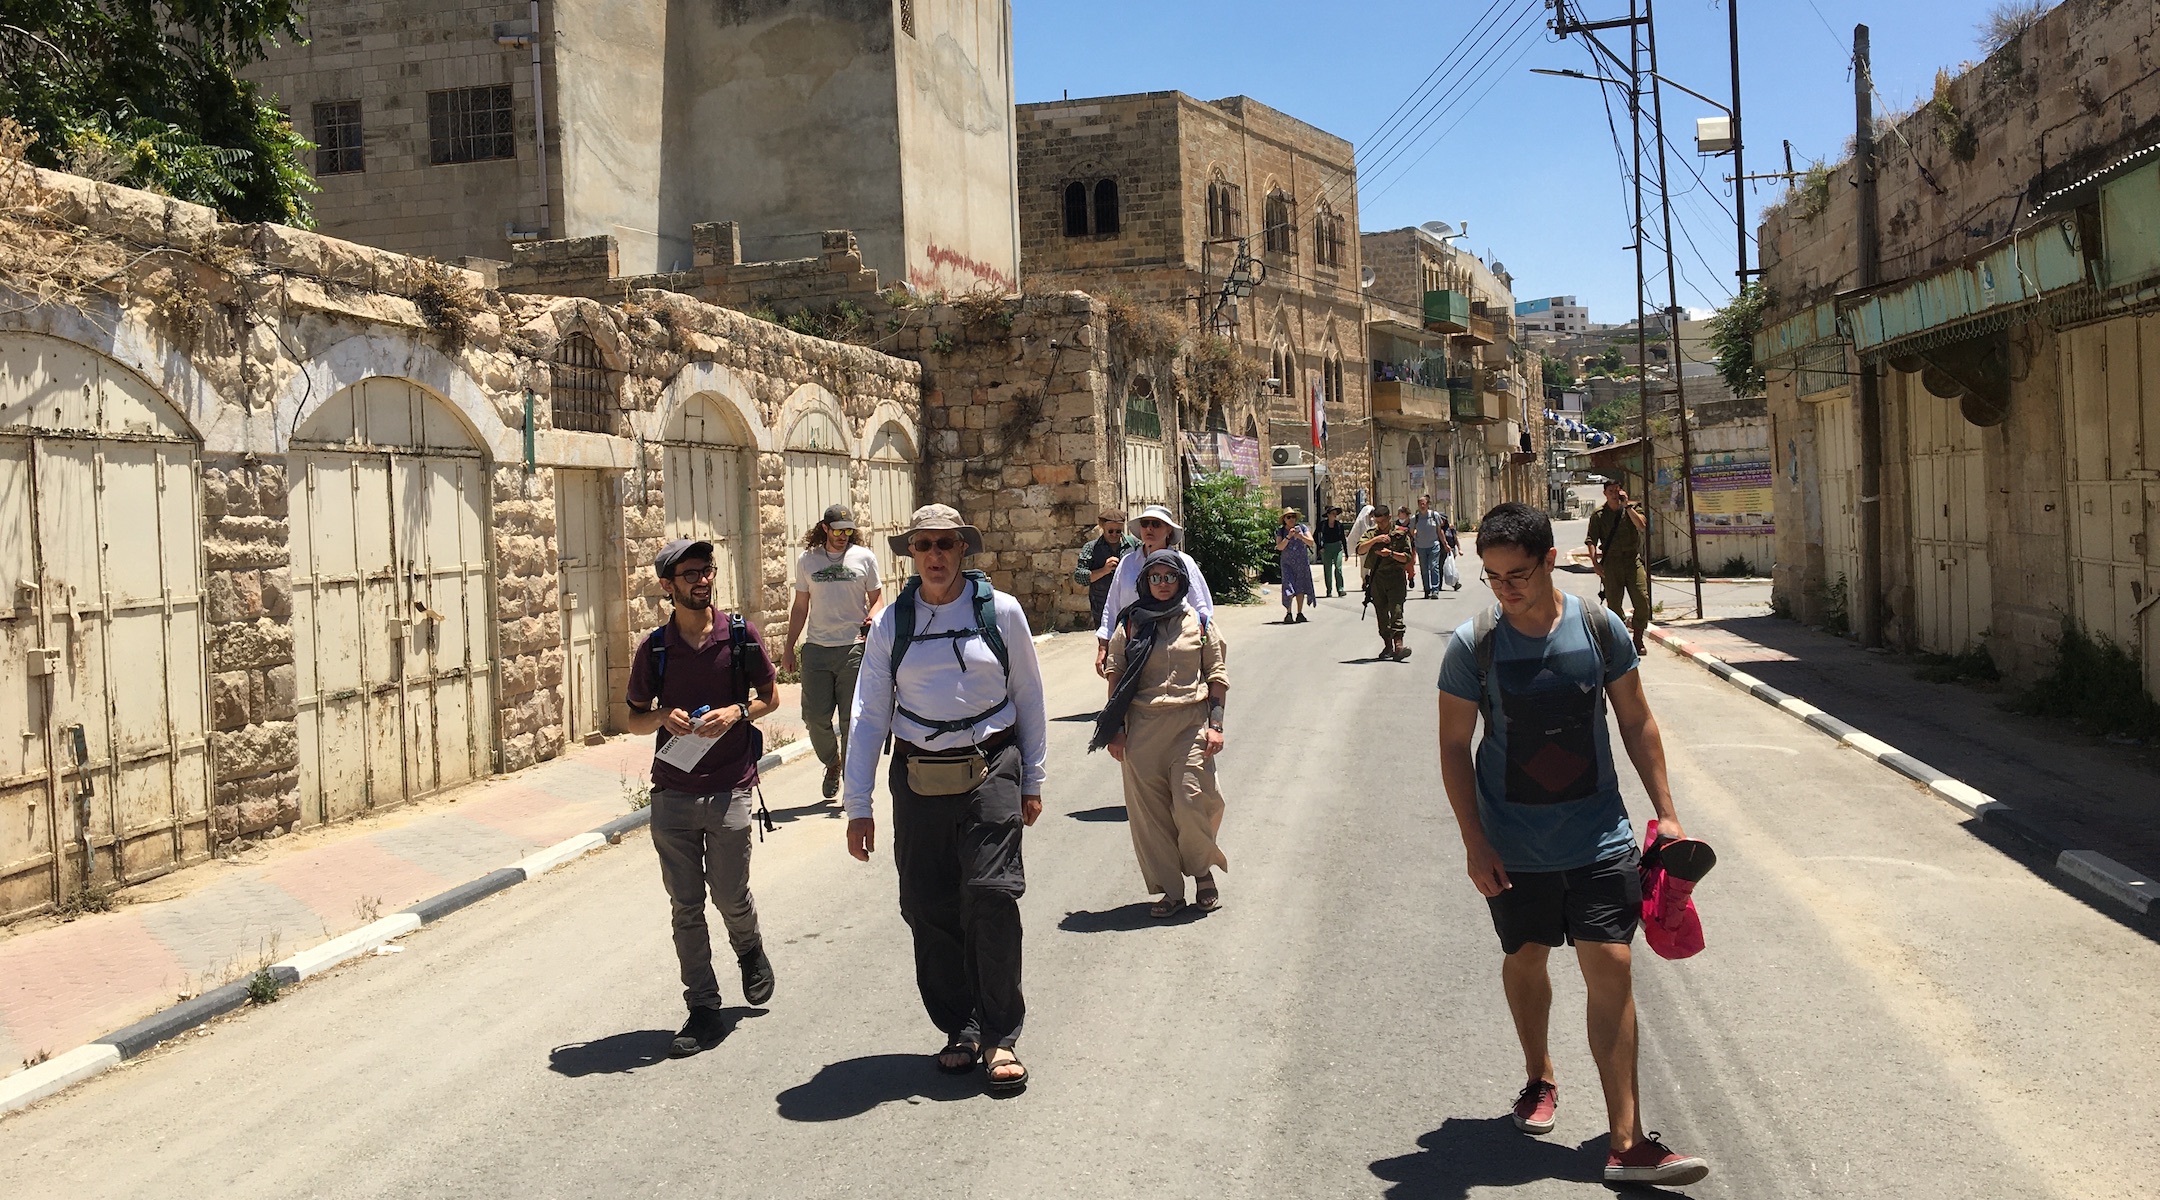 Participants on a recent tour of Israel and the West Bank, which included members of Pittsburgh’s Congregation Dor Hadash, walk through Hebron. (Courtesy of Shleimut)